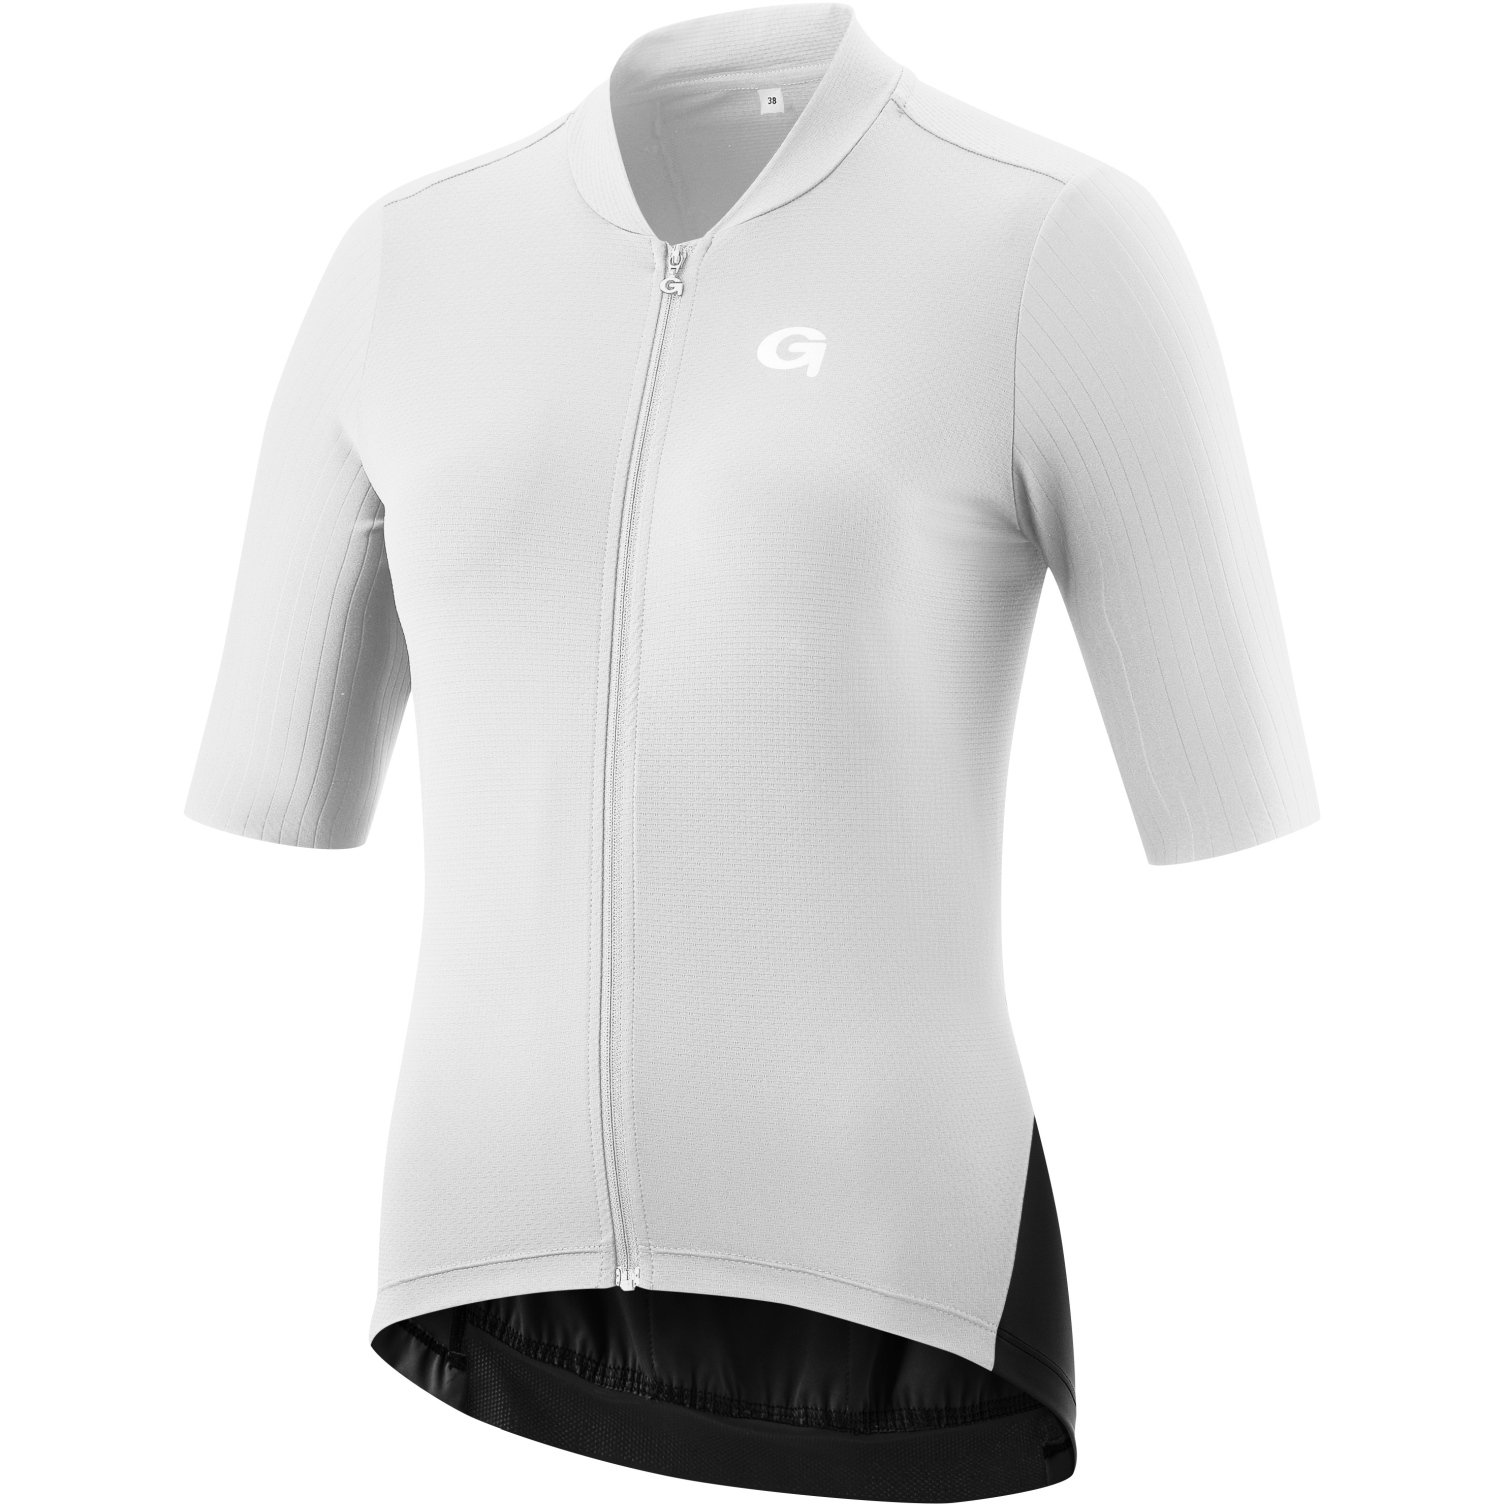 Picture of Gonso SITIVO Cycling Jersey Women - White/Black